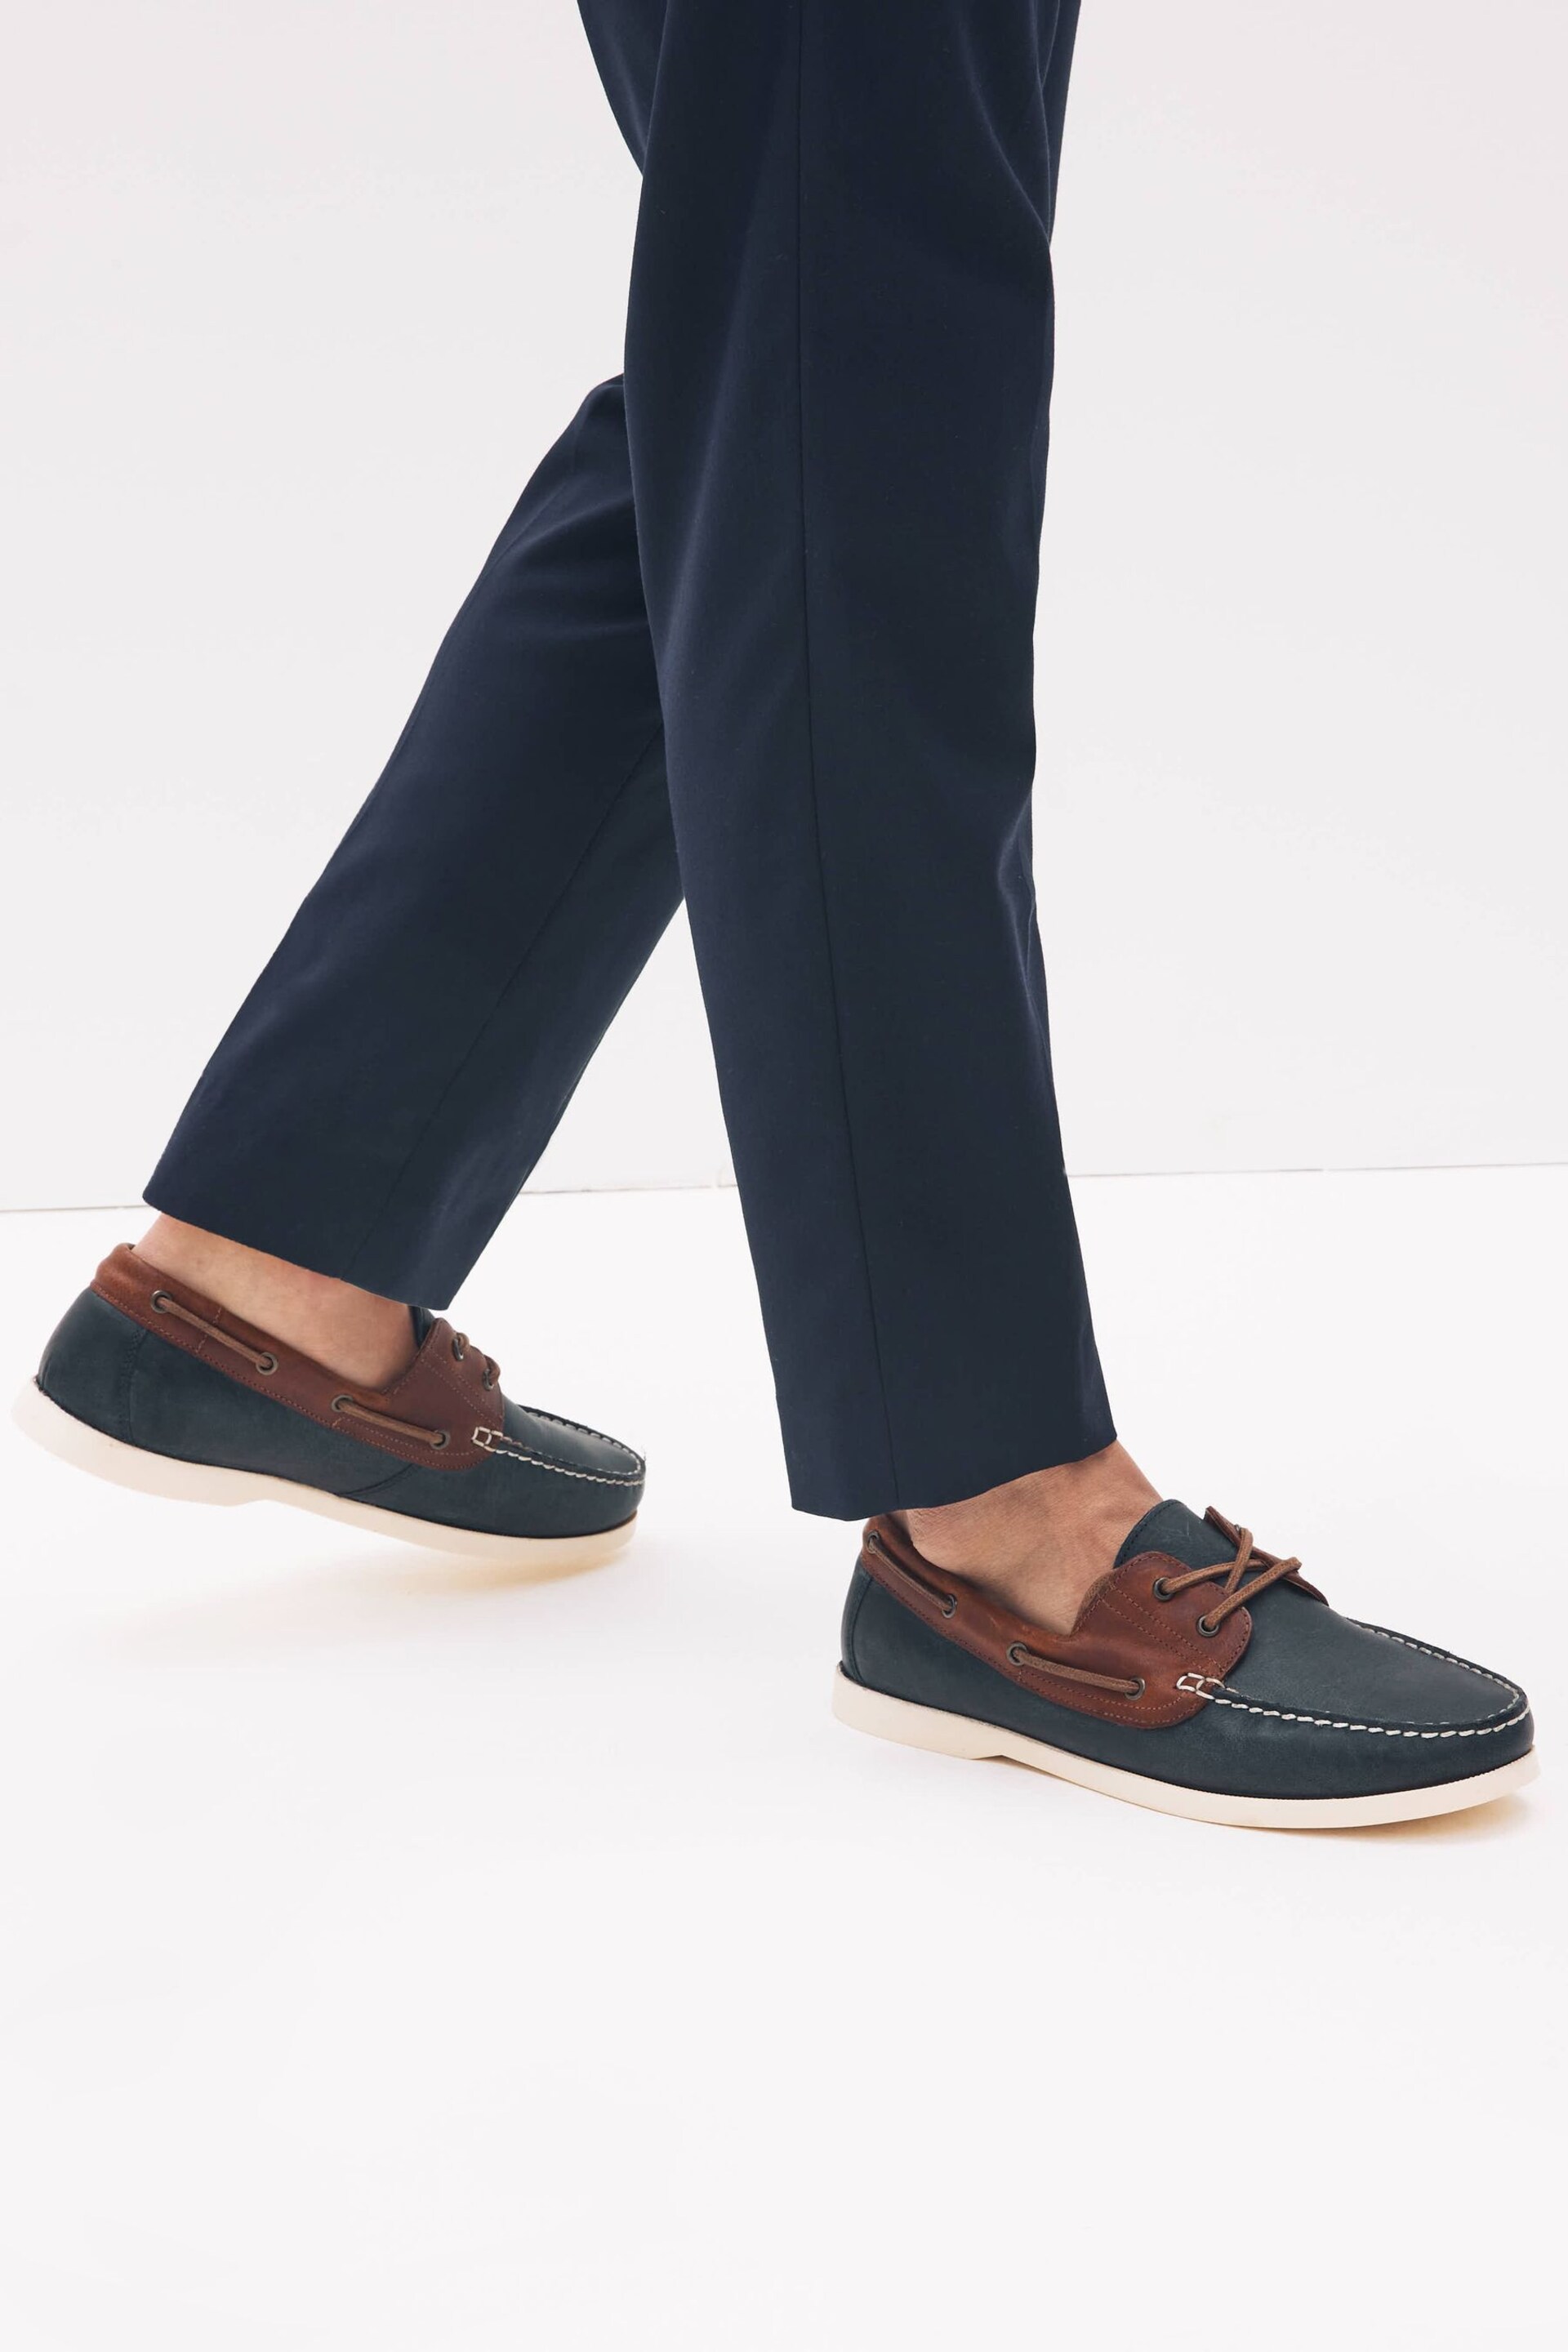 Navy Blue Leather Boat Shoes - Image 1 of 5